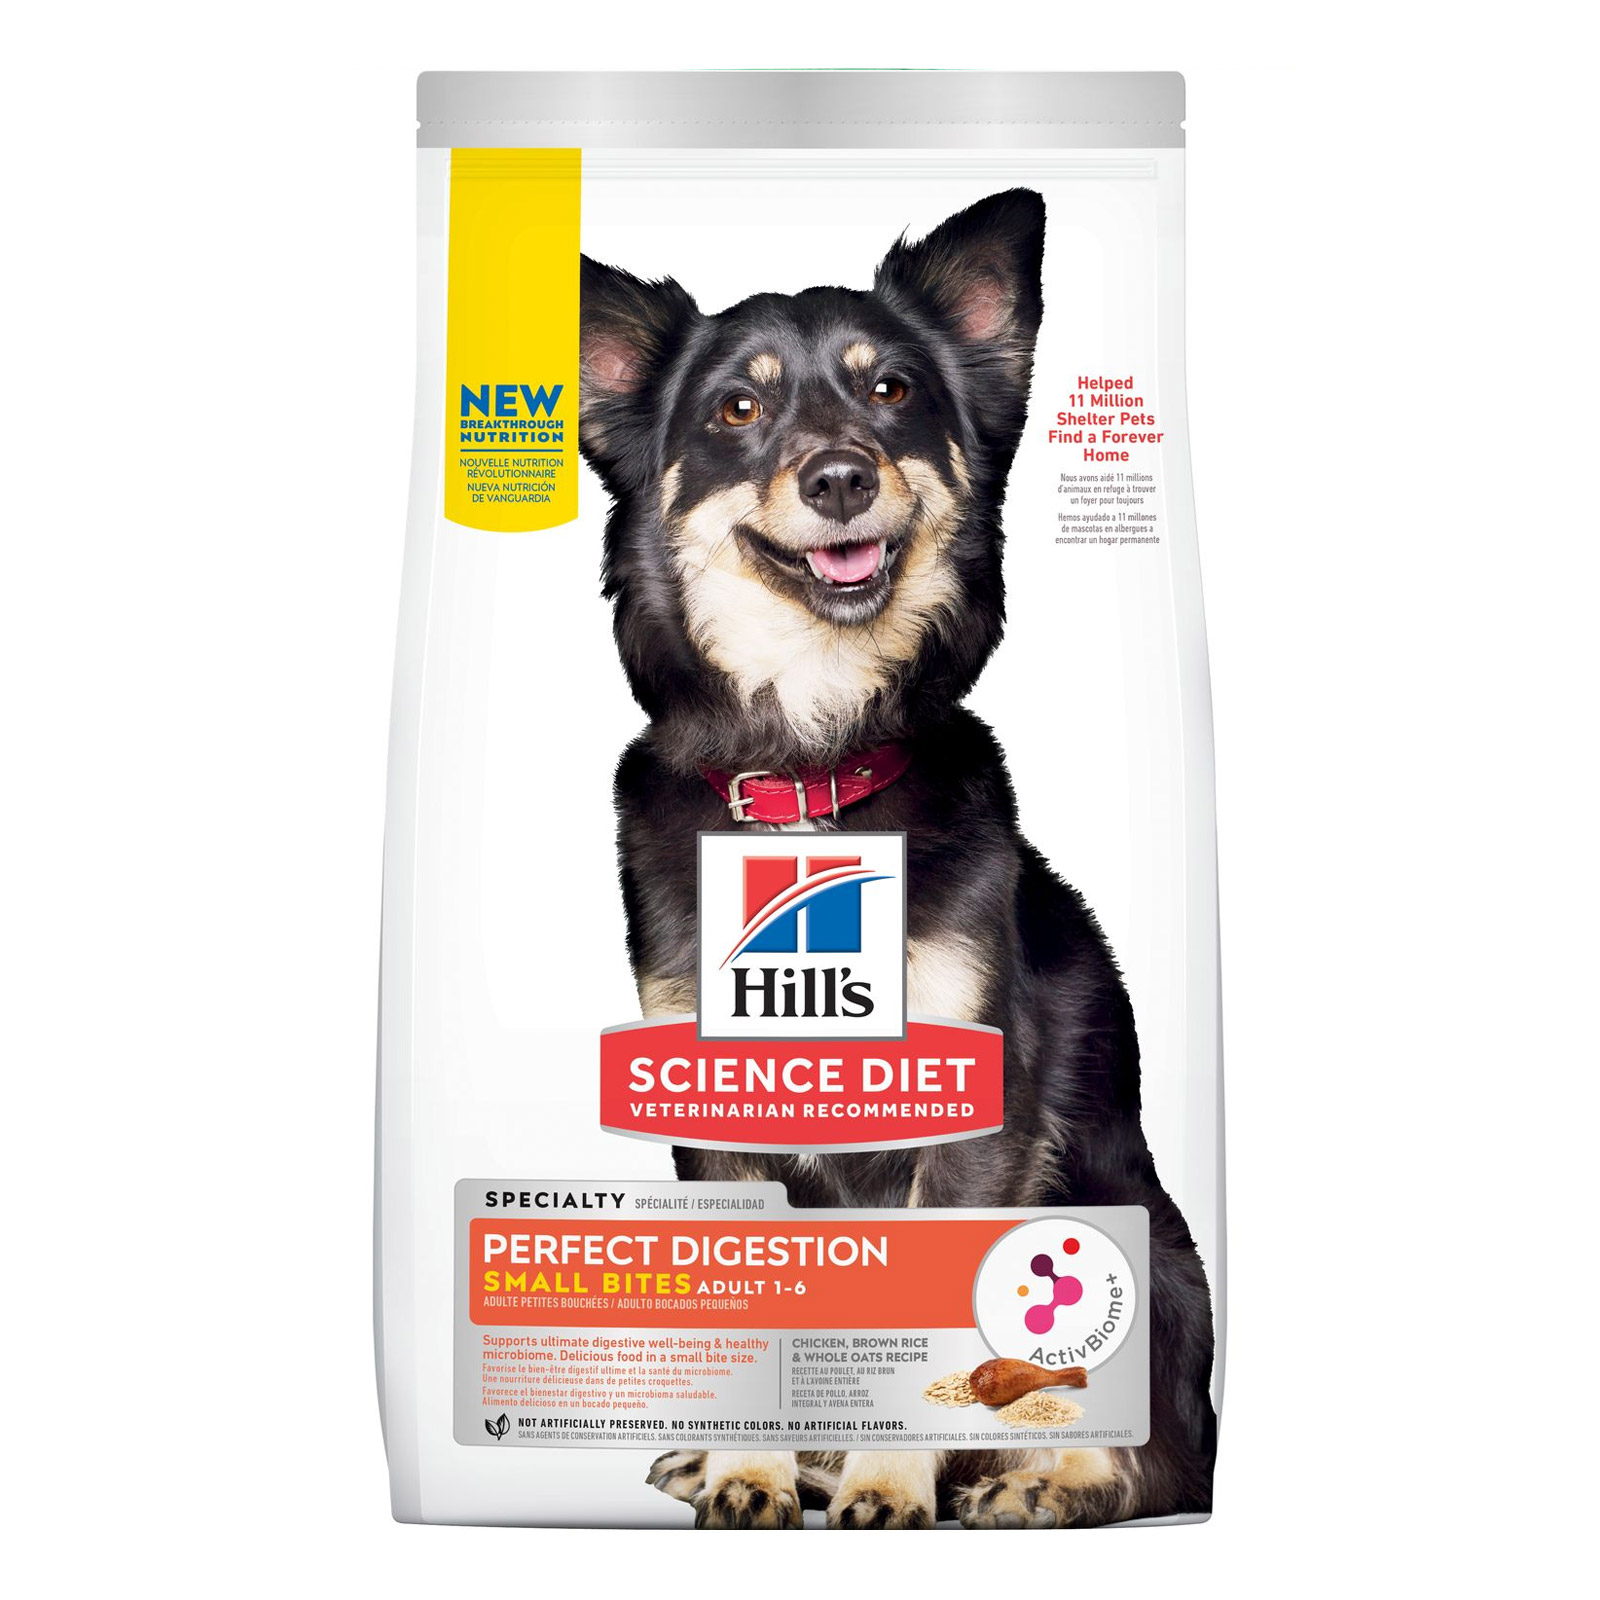 Hill's Science Diet Perfect Digestion Small Bites Dog Food for Food